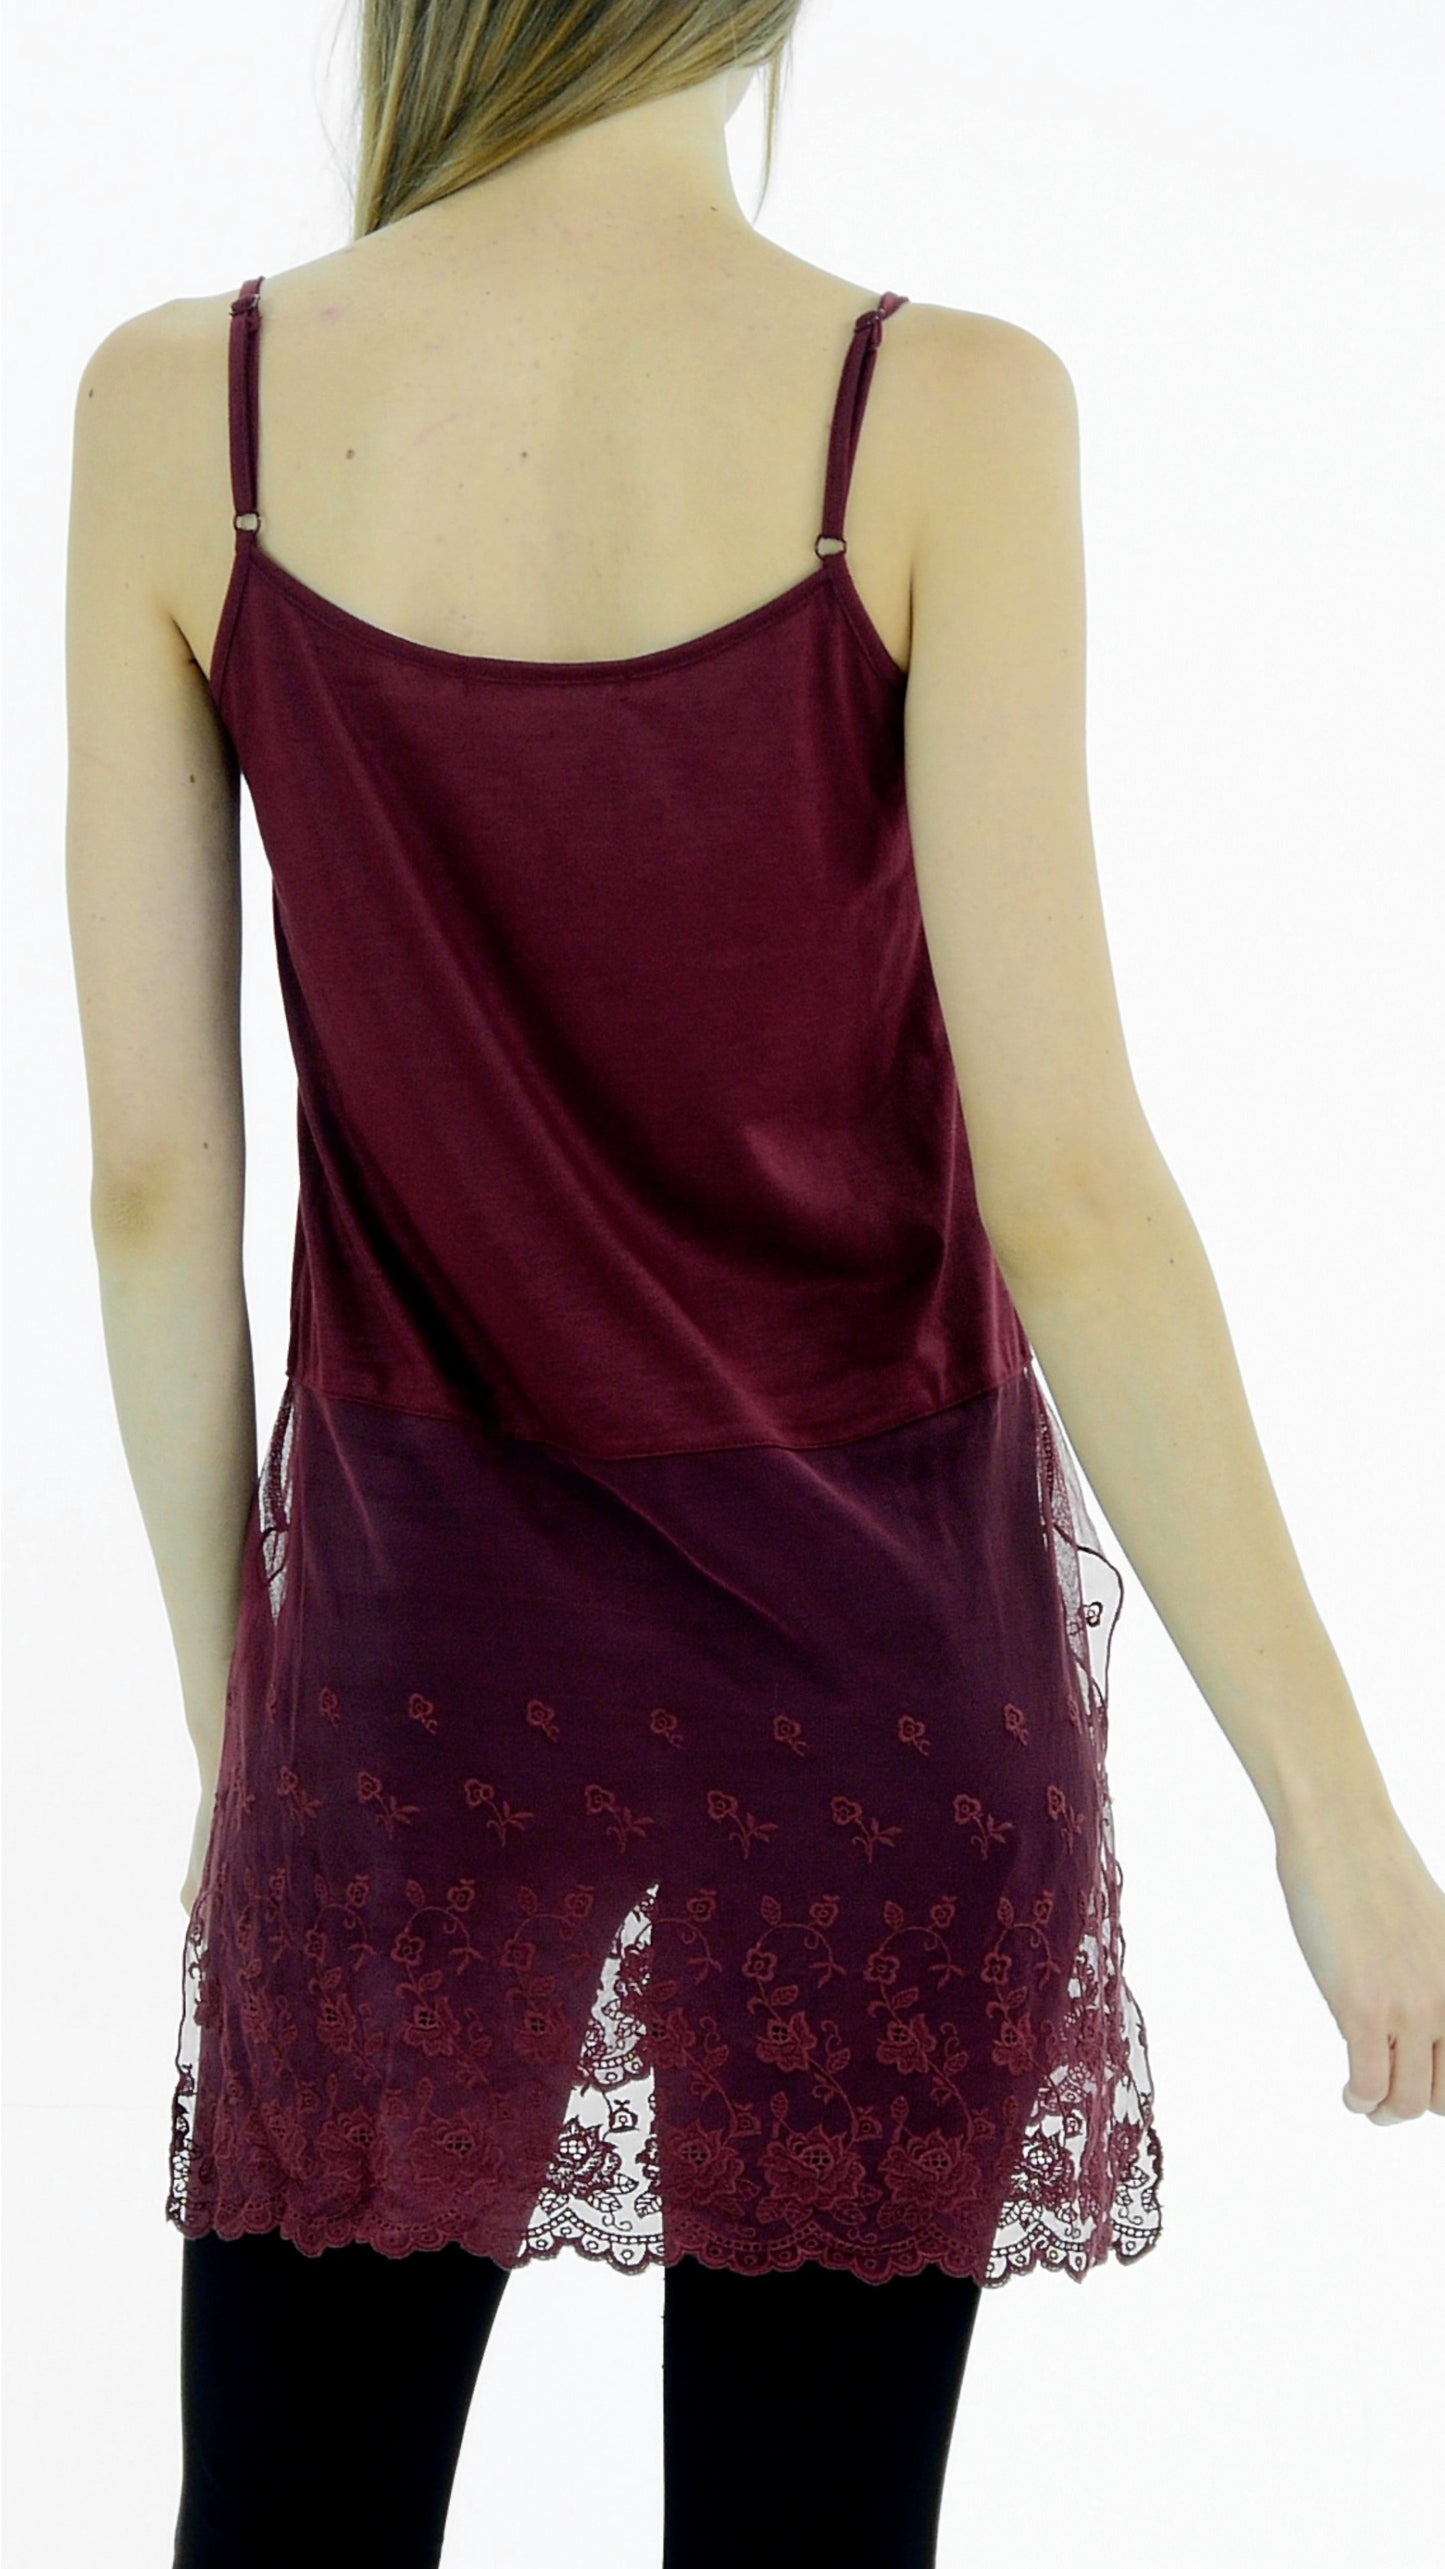 Women's Cotton Top Extender Camisole Layering Top with Lace Sheer Bottom - Shop Lev